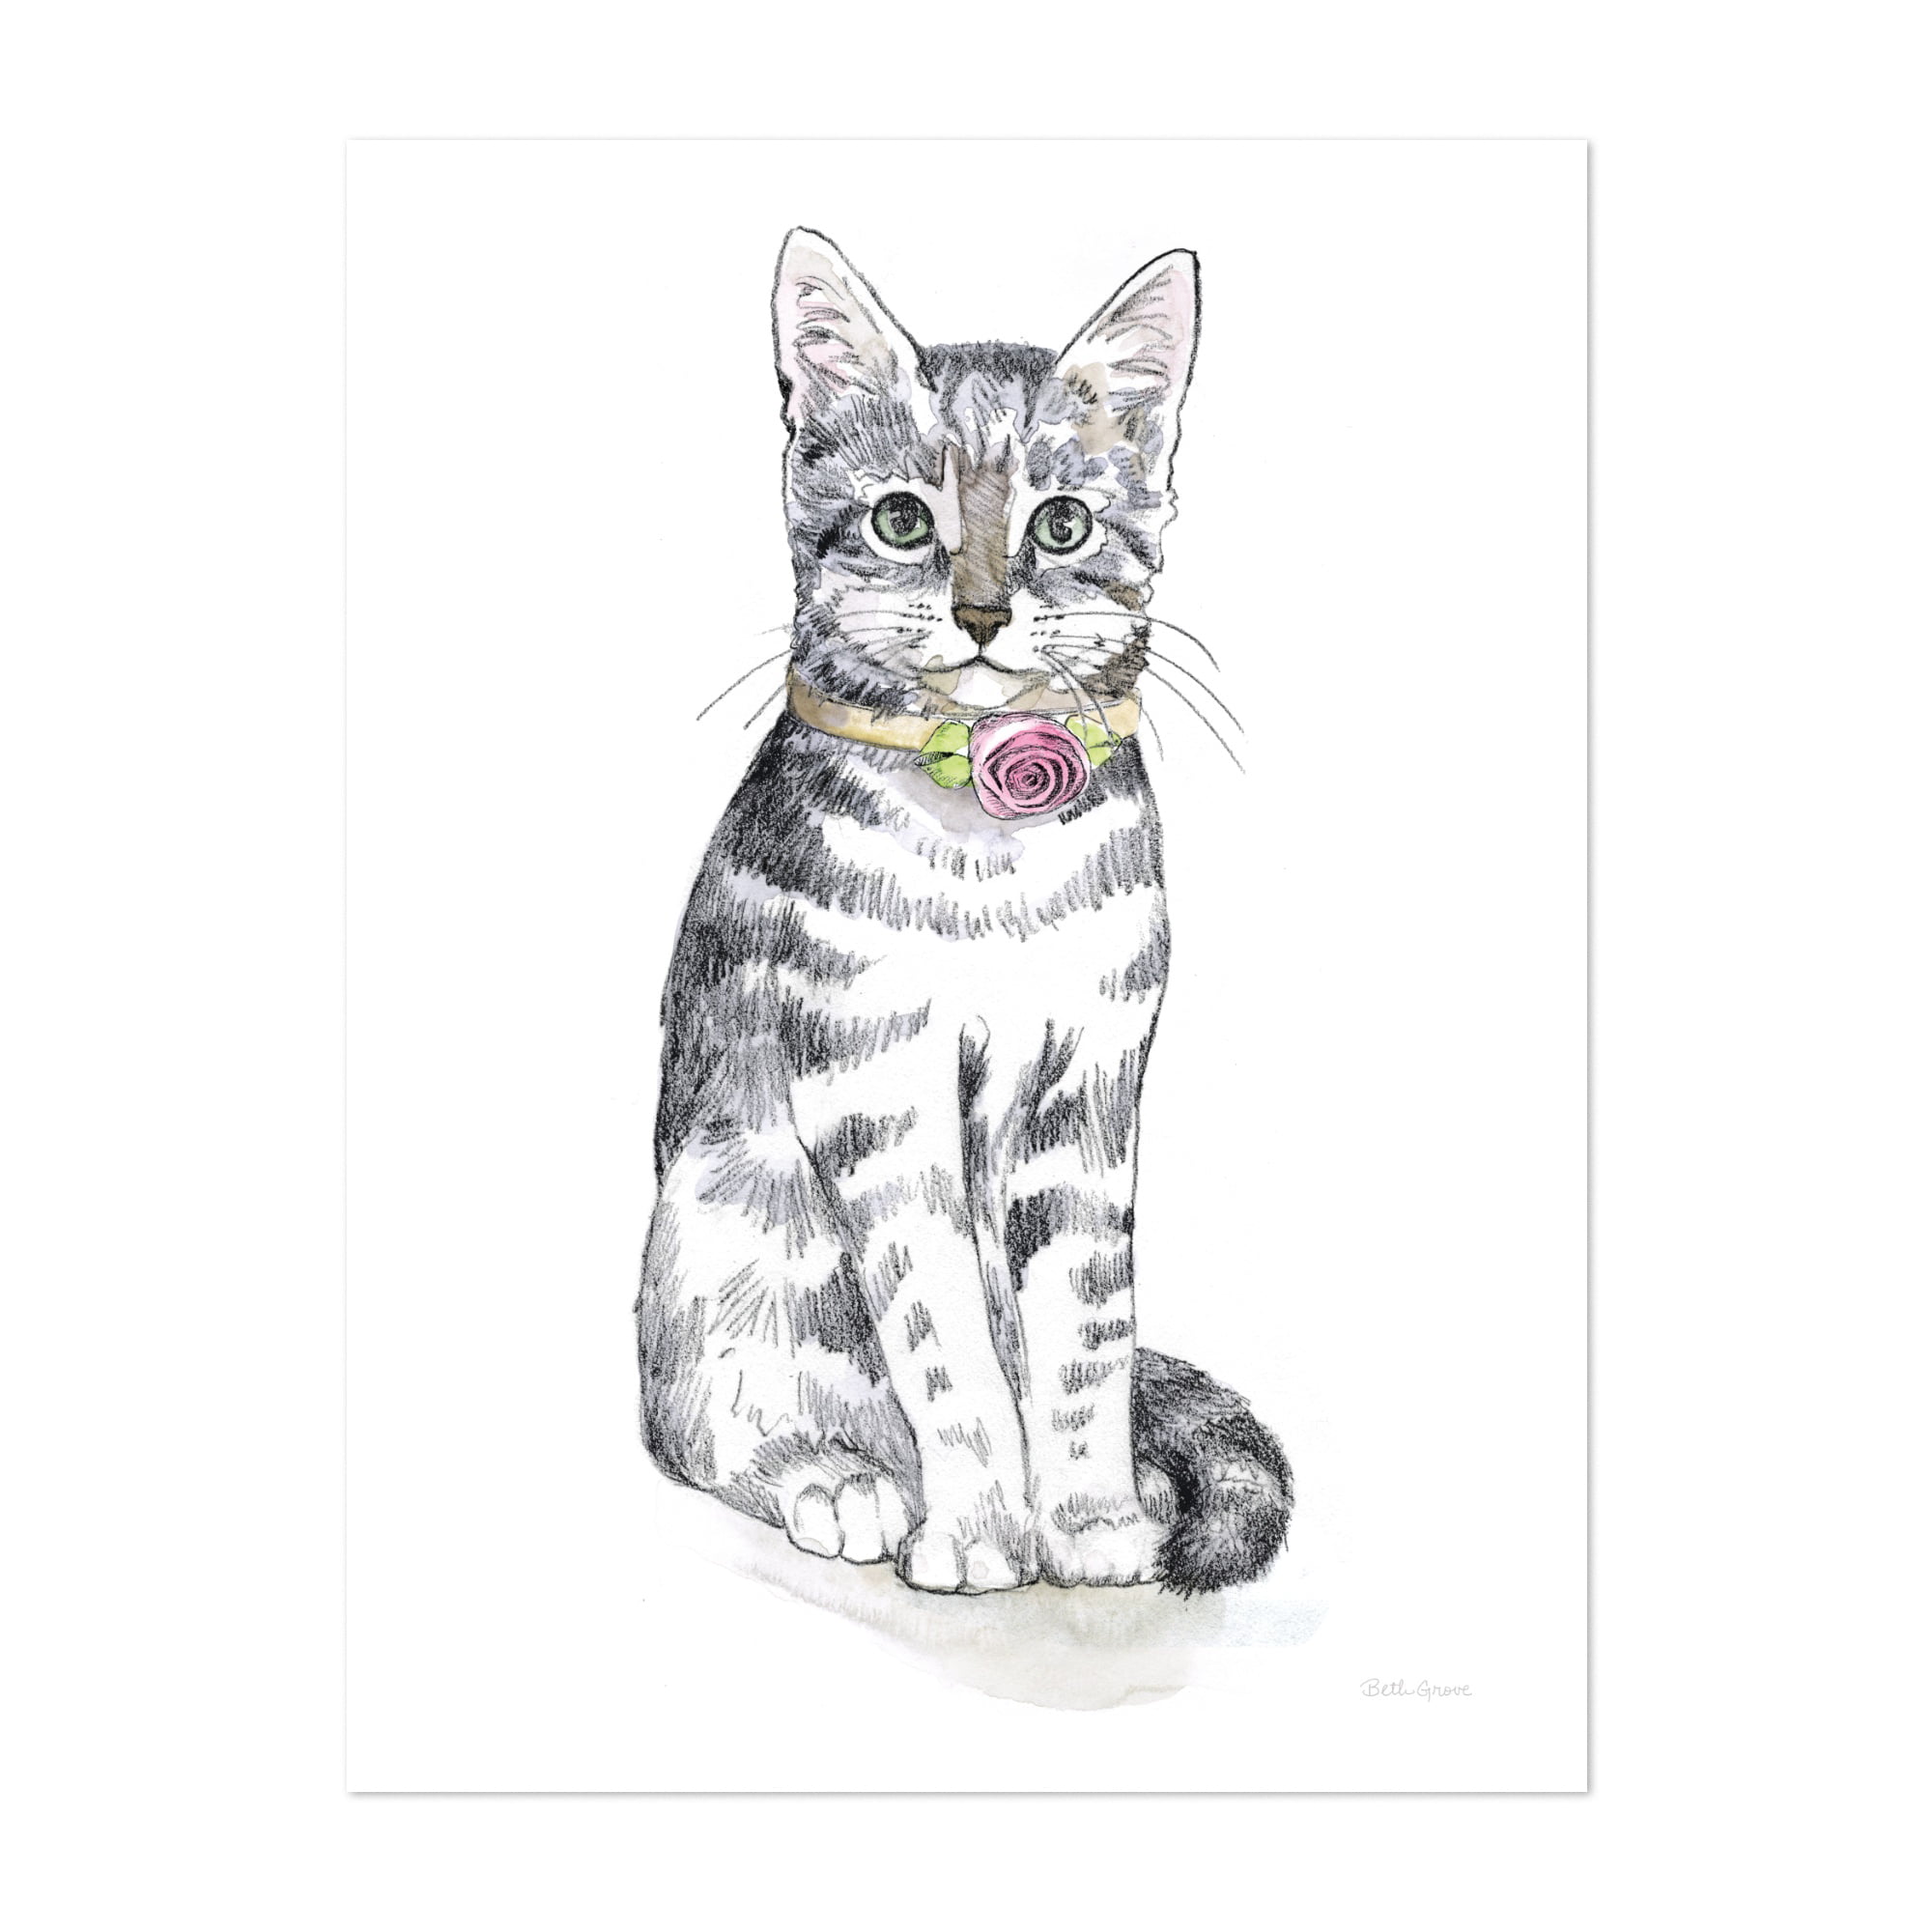 Original watercolor print of a tabby cat 8 x 10 inches